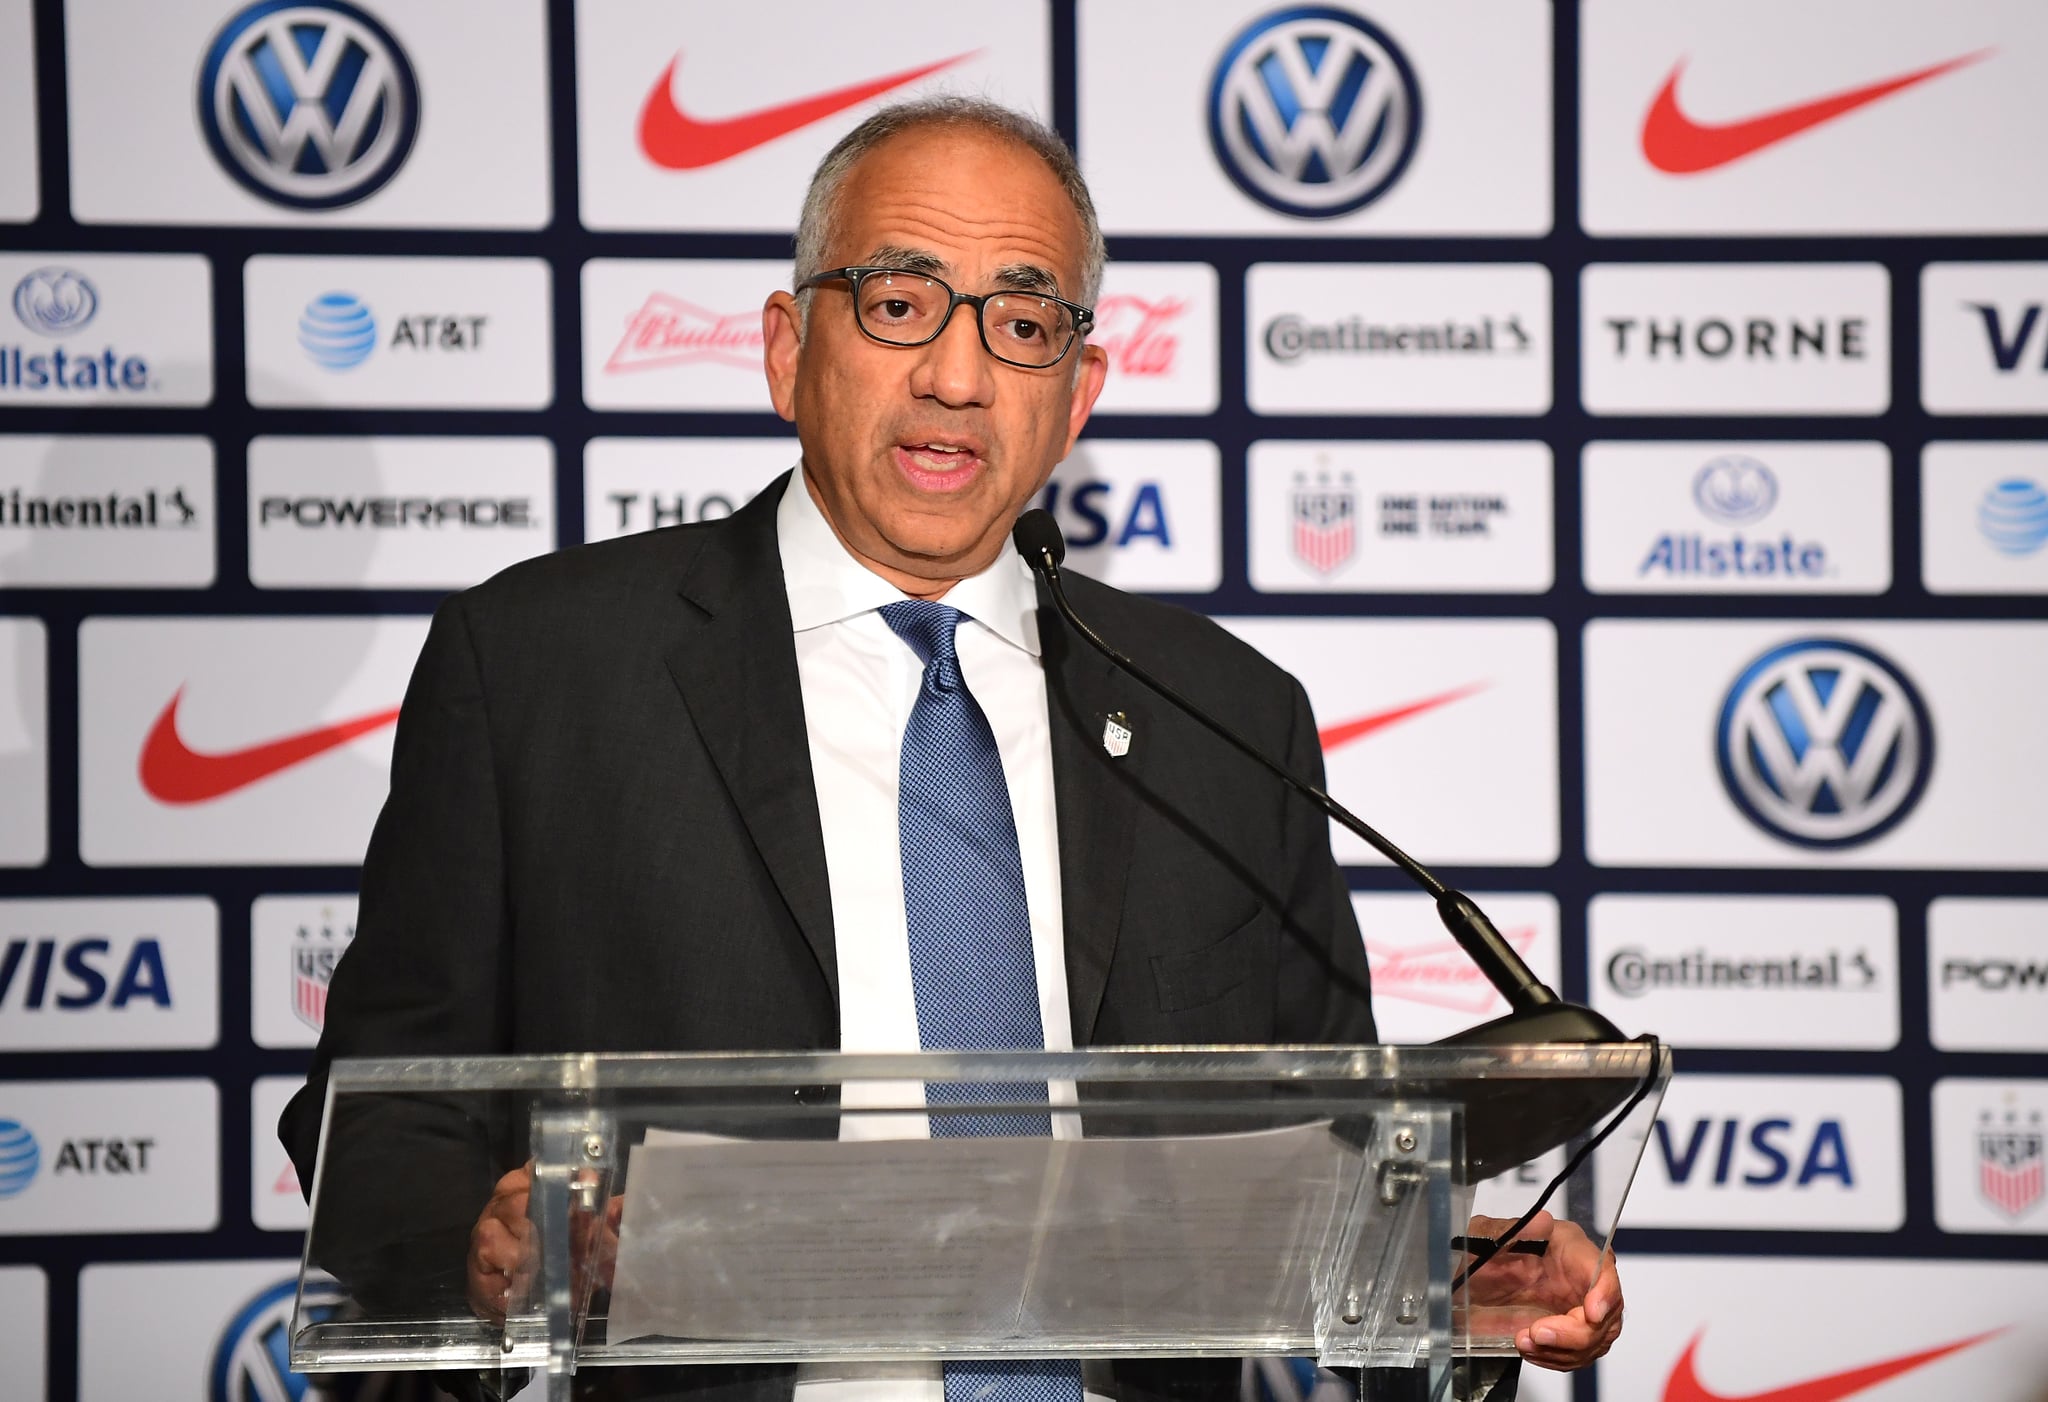 NEW YORK, NEW YORK - OCTOBER 28: Carlos Cordeiro, U.S. Football President,  speaks at a press conference where Vlatko Andonovski was introduced as the U.S. Women's National Team head coach, at Kimpton Hotel Eventi on October 28, 2019 in New York City. (Photo by Emilee Chinn/Getty Images)